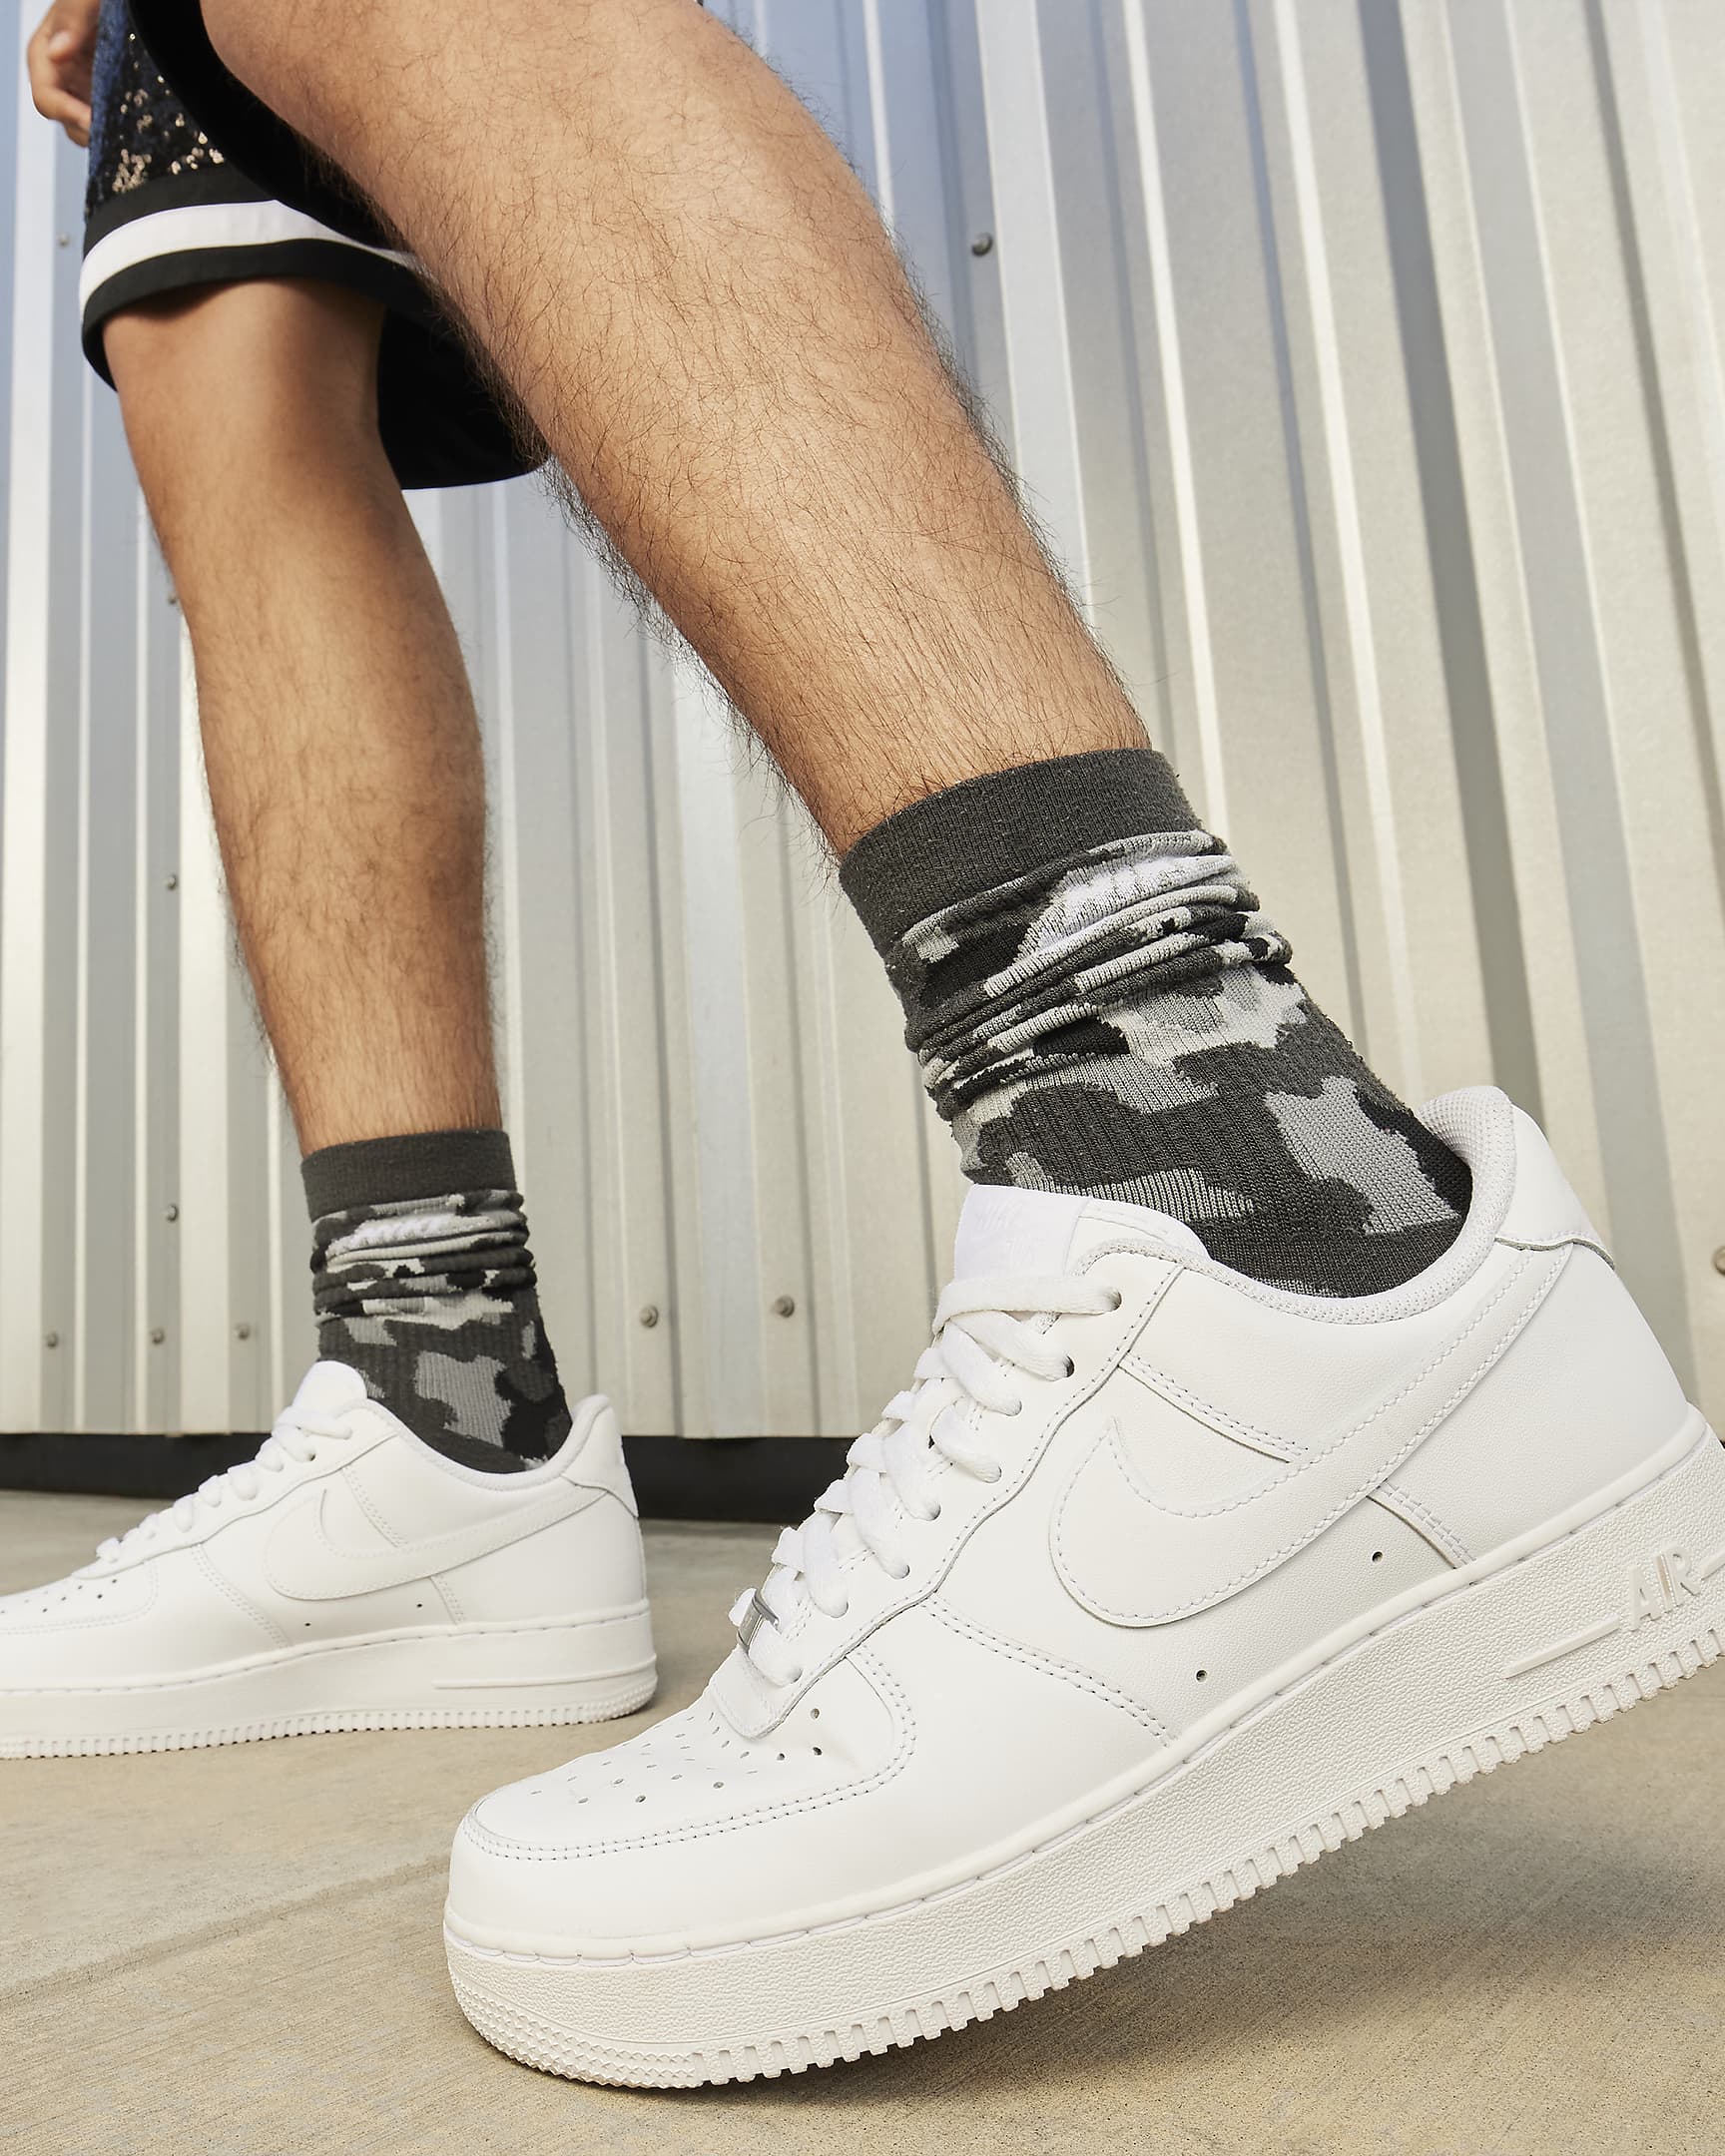 Nike Air Force 1 '07 Men's Shoes. Nike IL